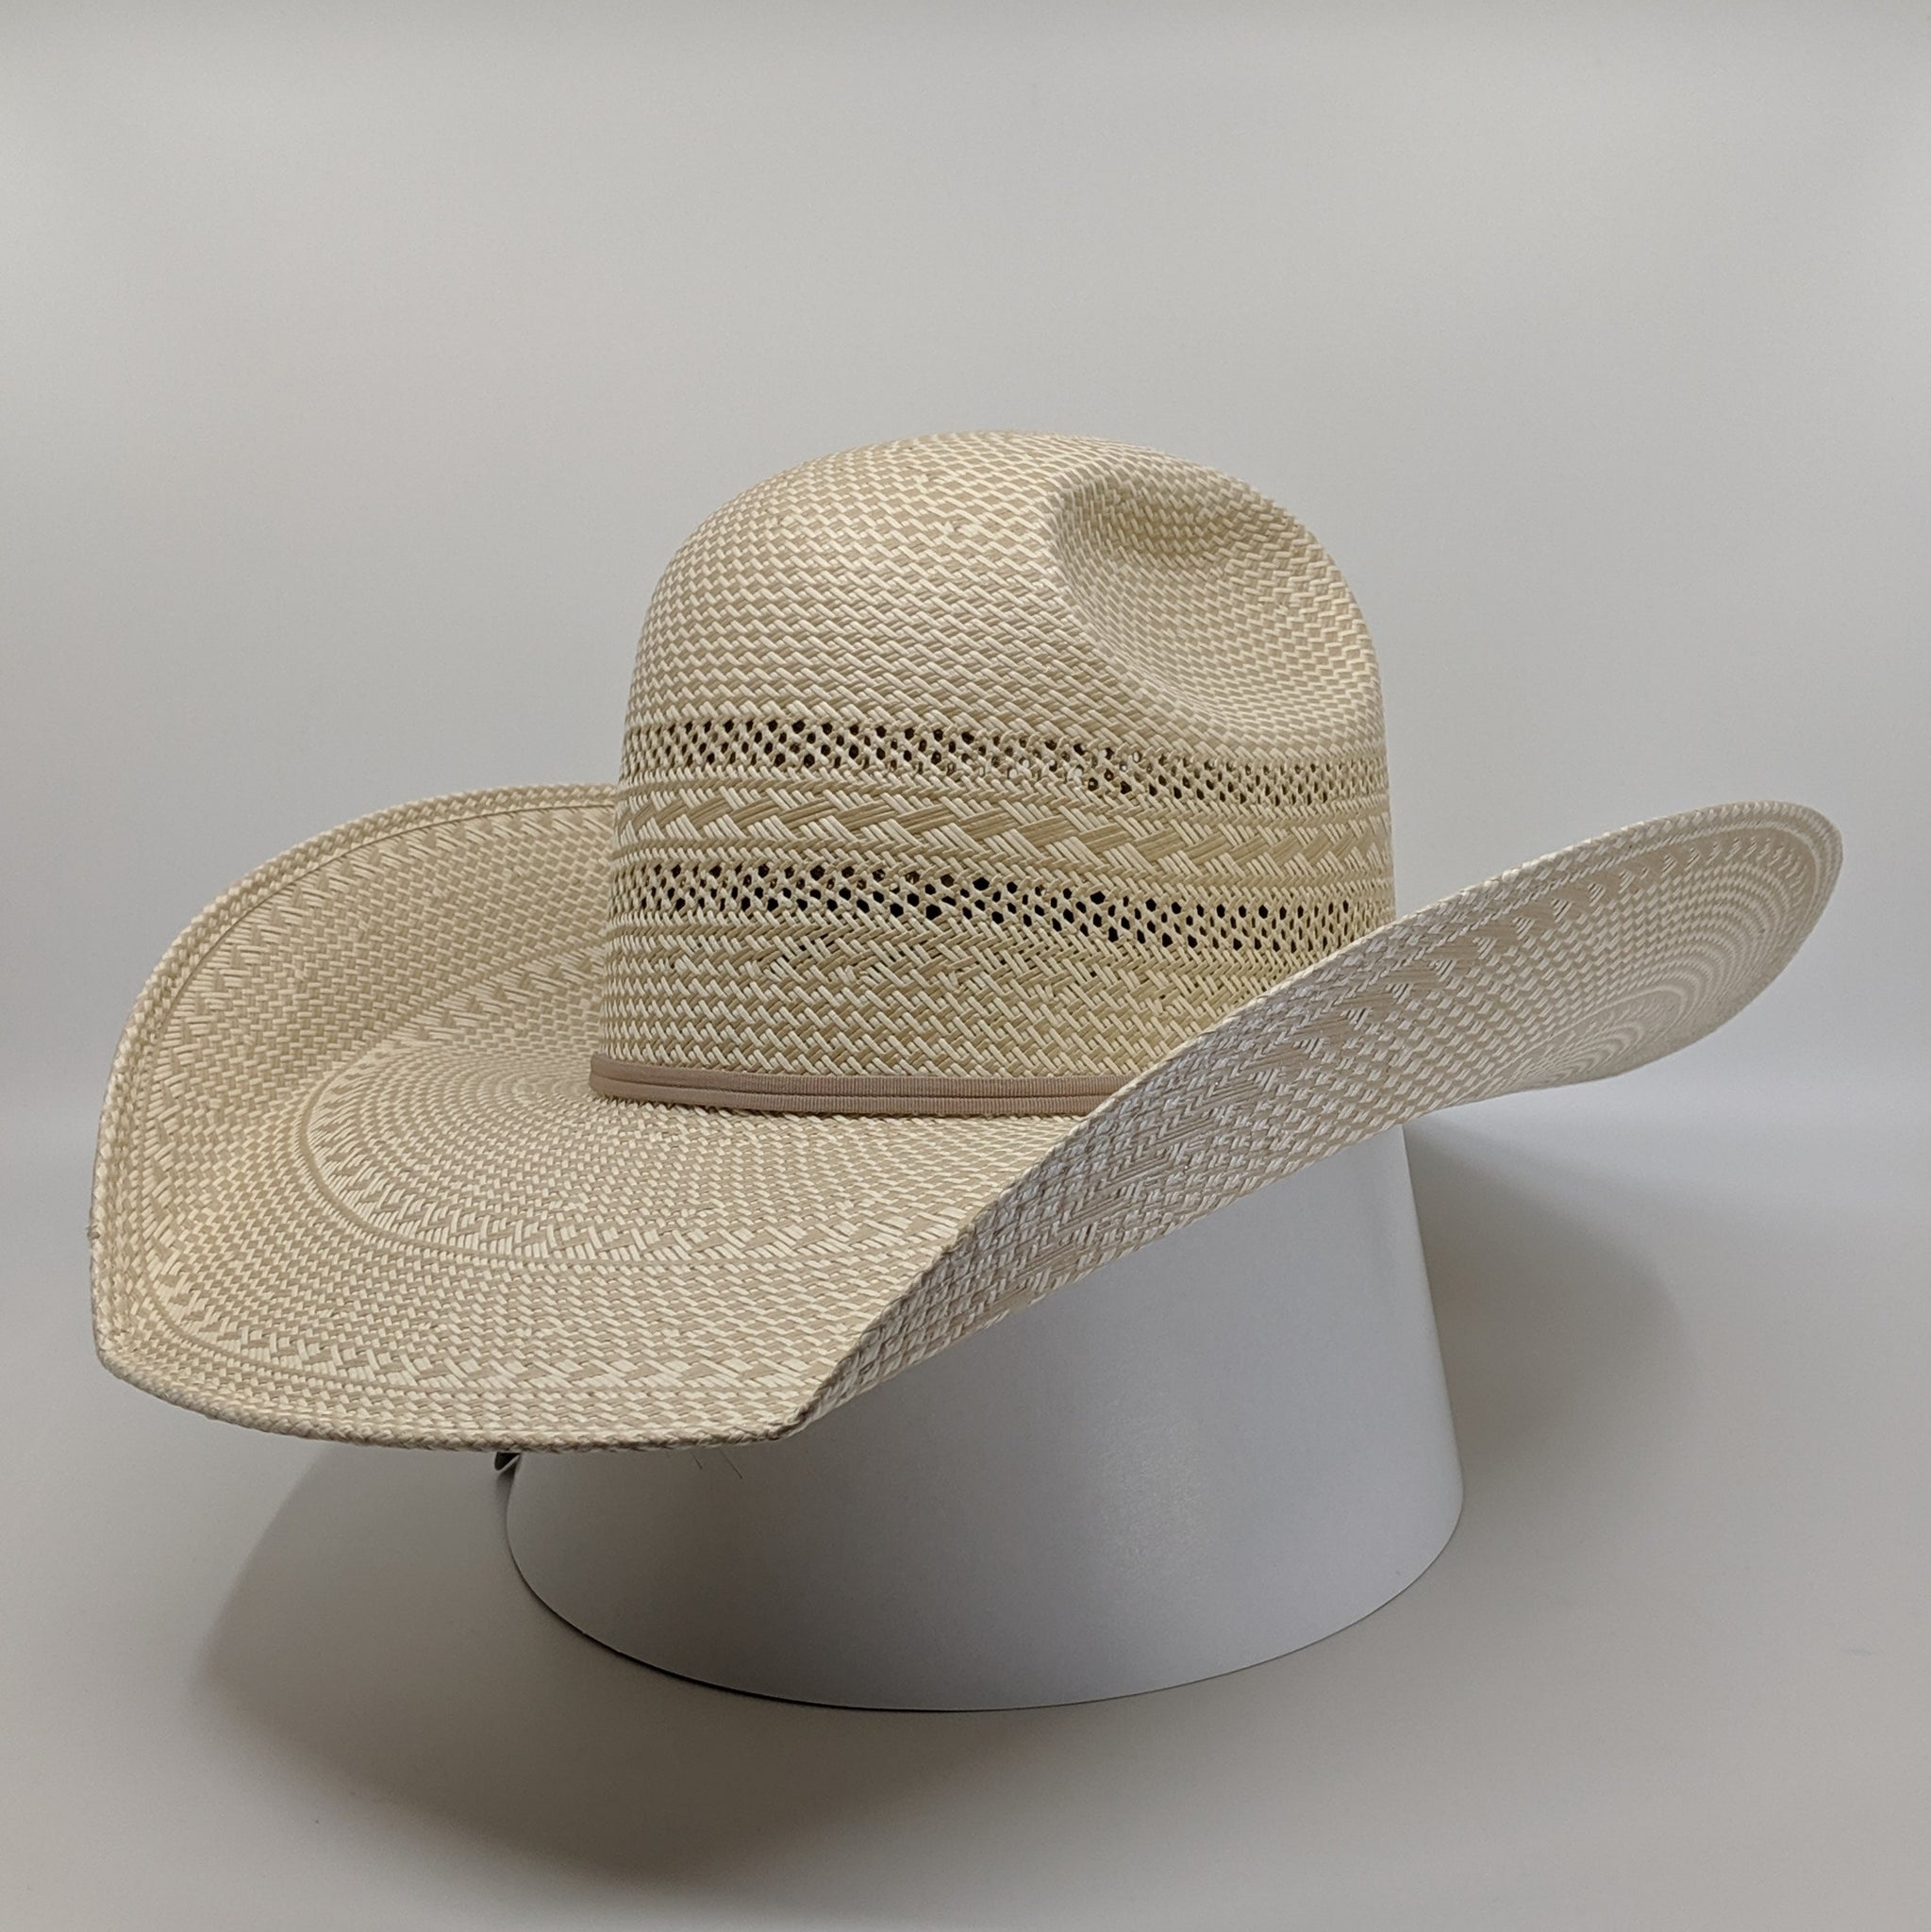 Cowboy Hat Straw Cover